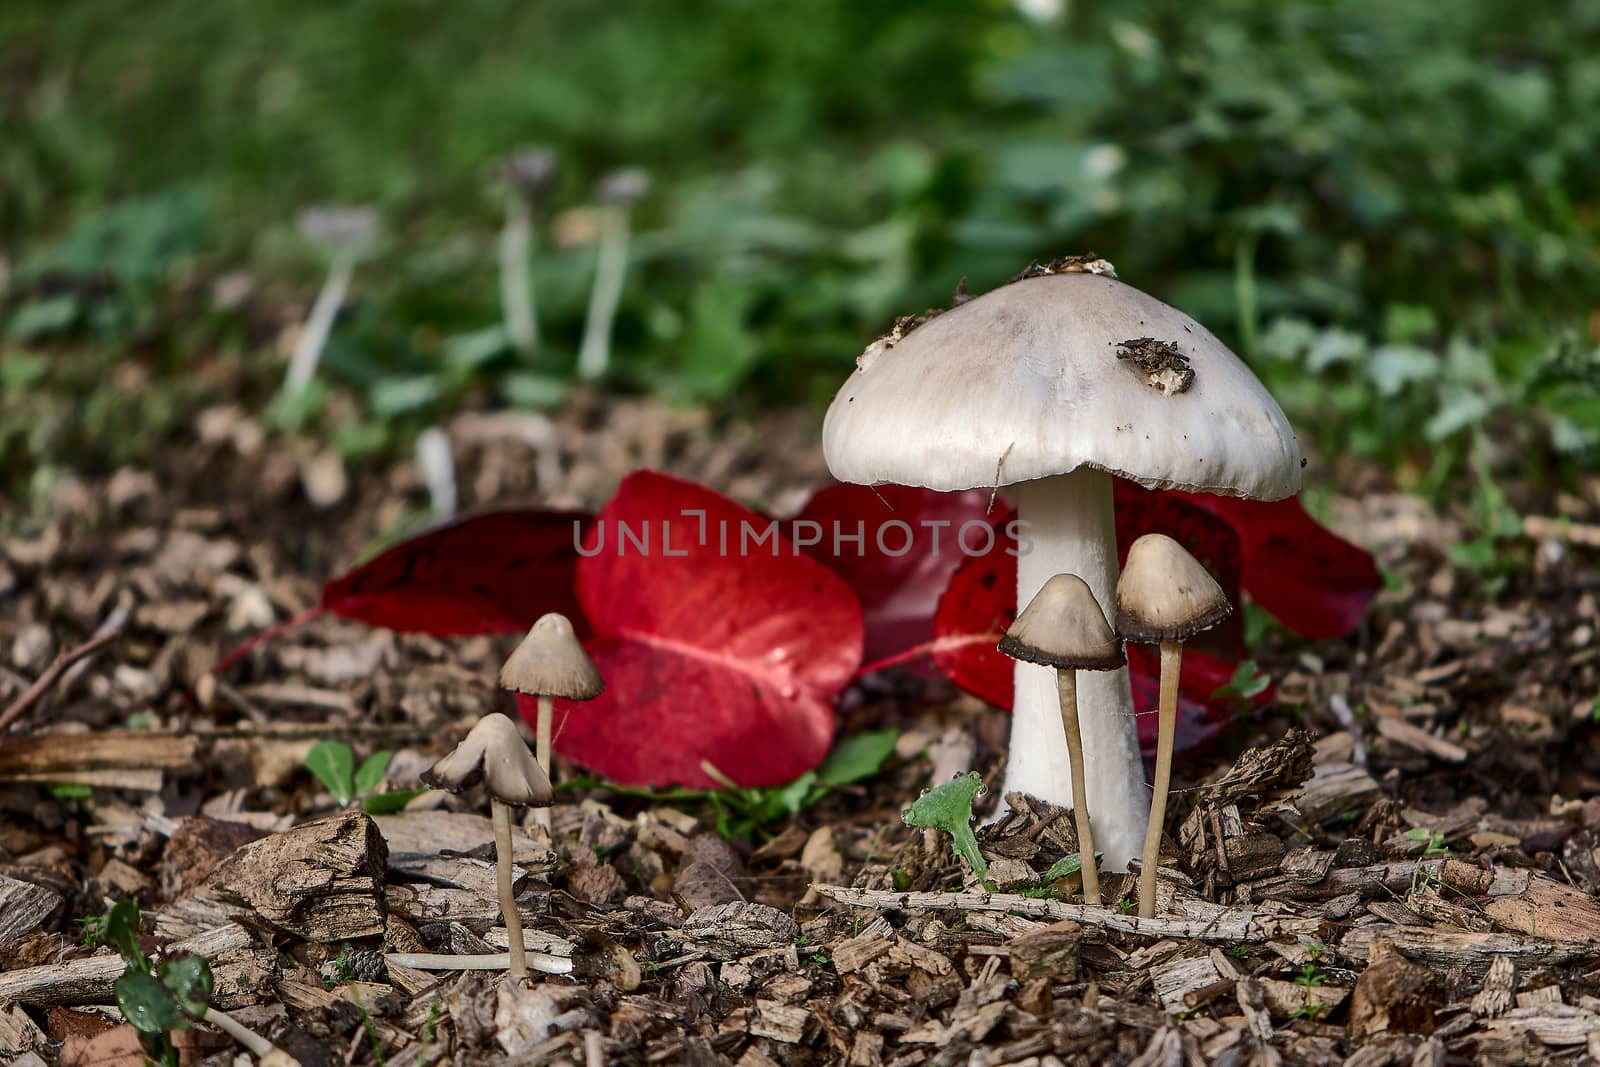 SMALL WILD AUTUMN MUSHROOMS IN THE FOREST SURROUNDED BY LEAVES